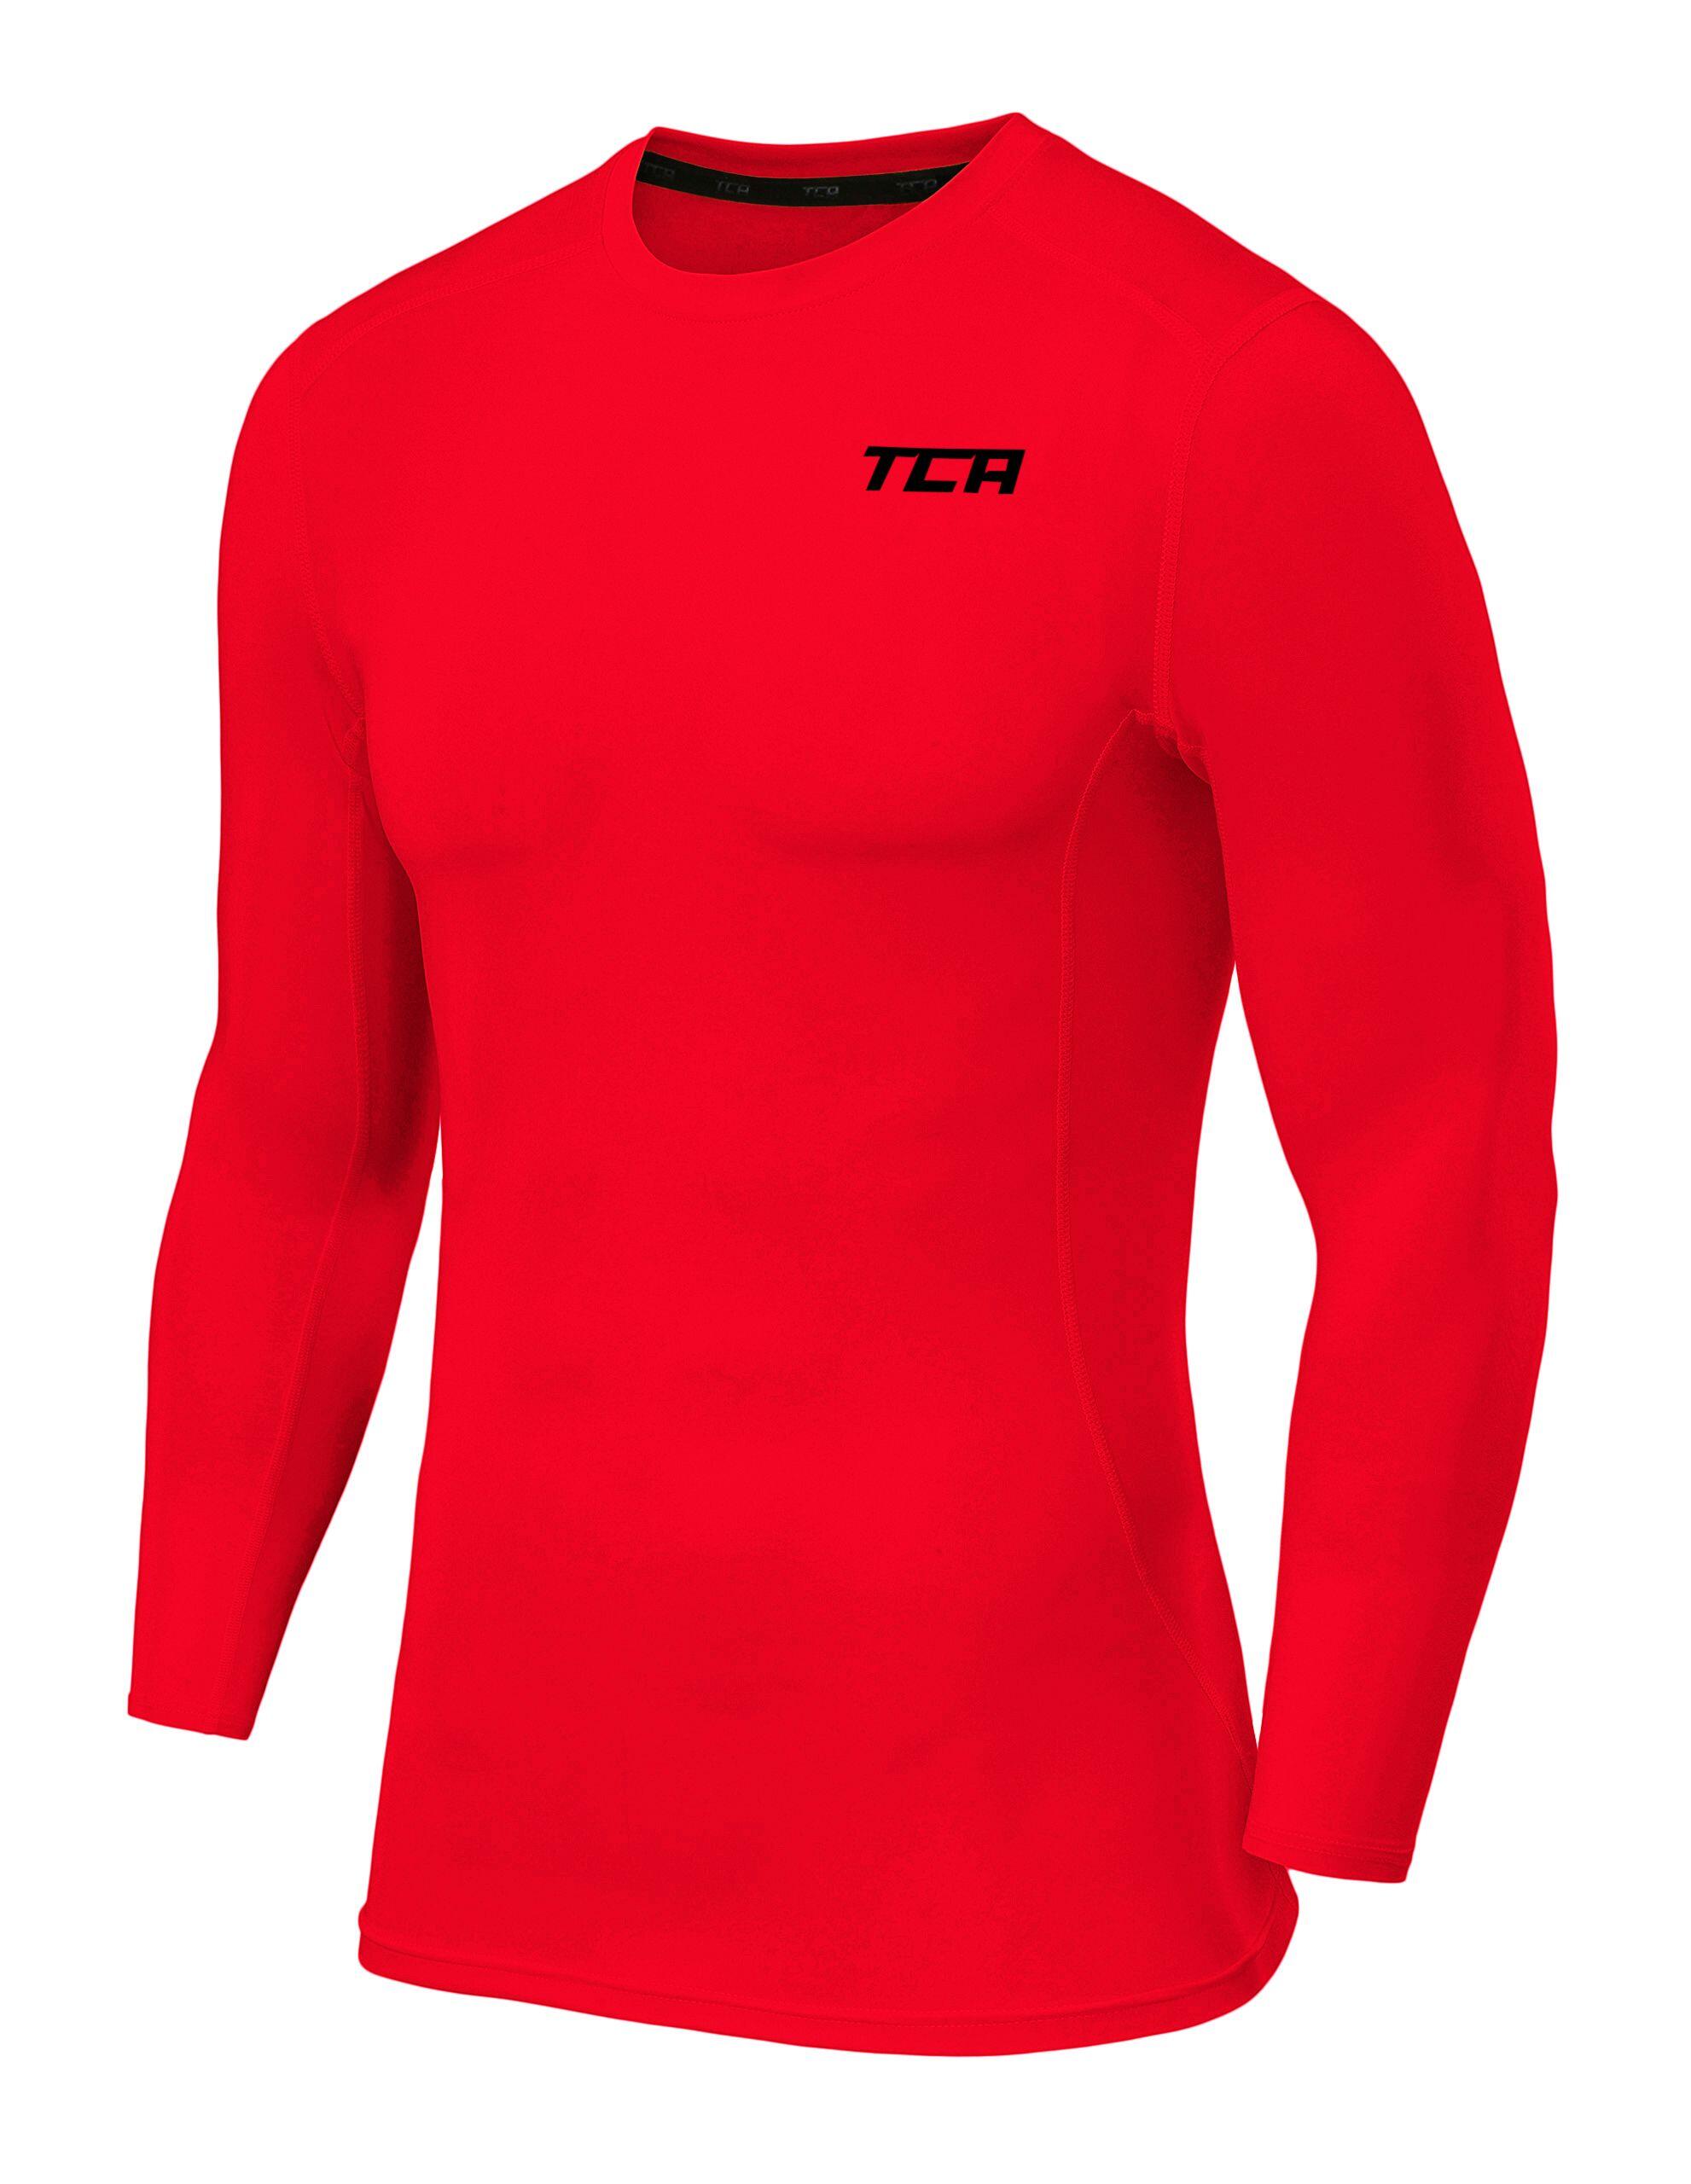 Boys' Performance Base Layer Compression Top - High Risk Red 2/5